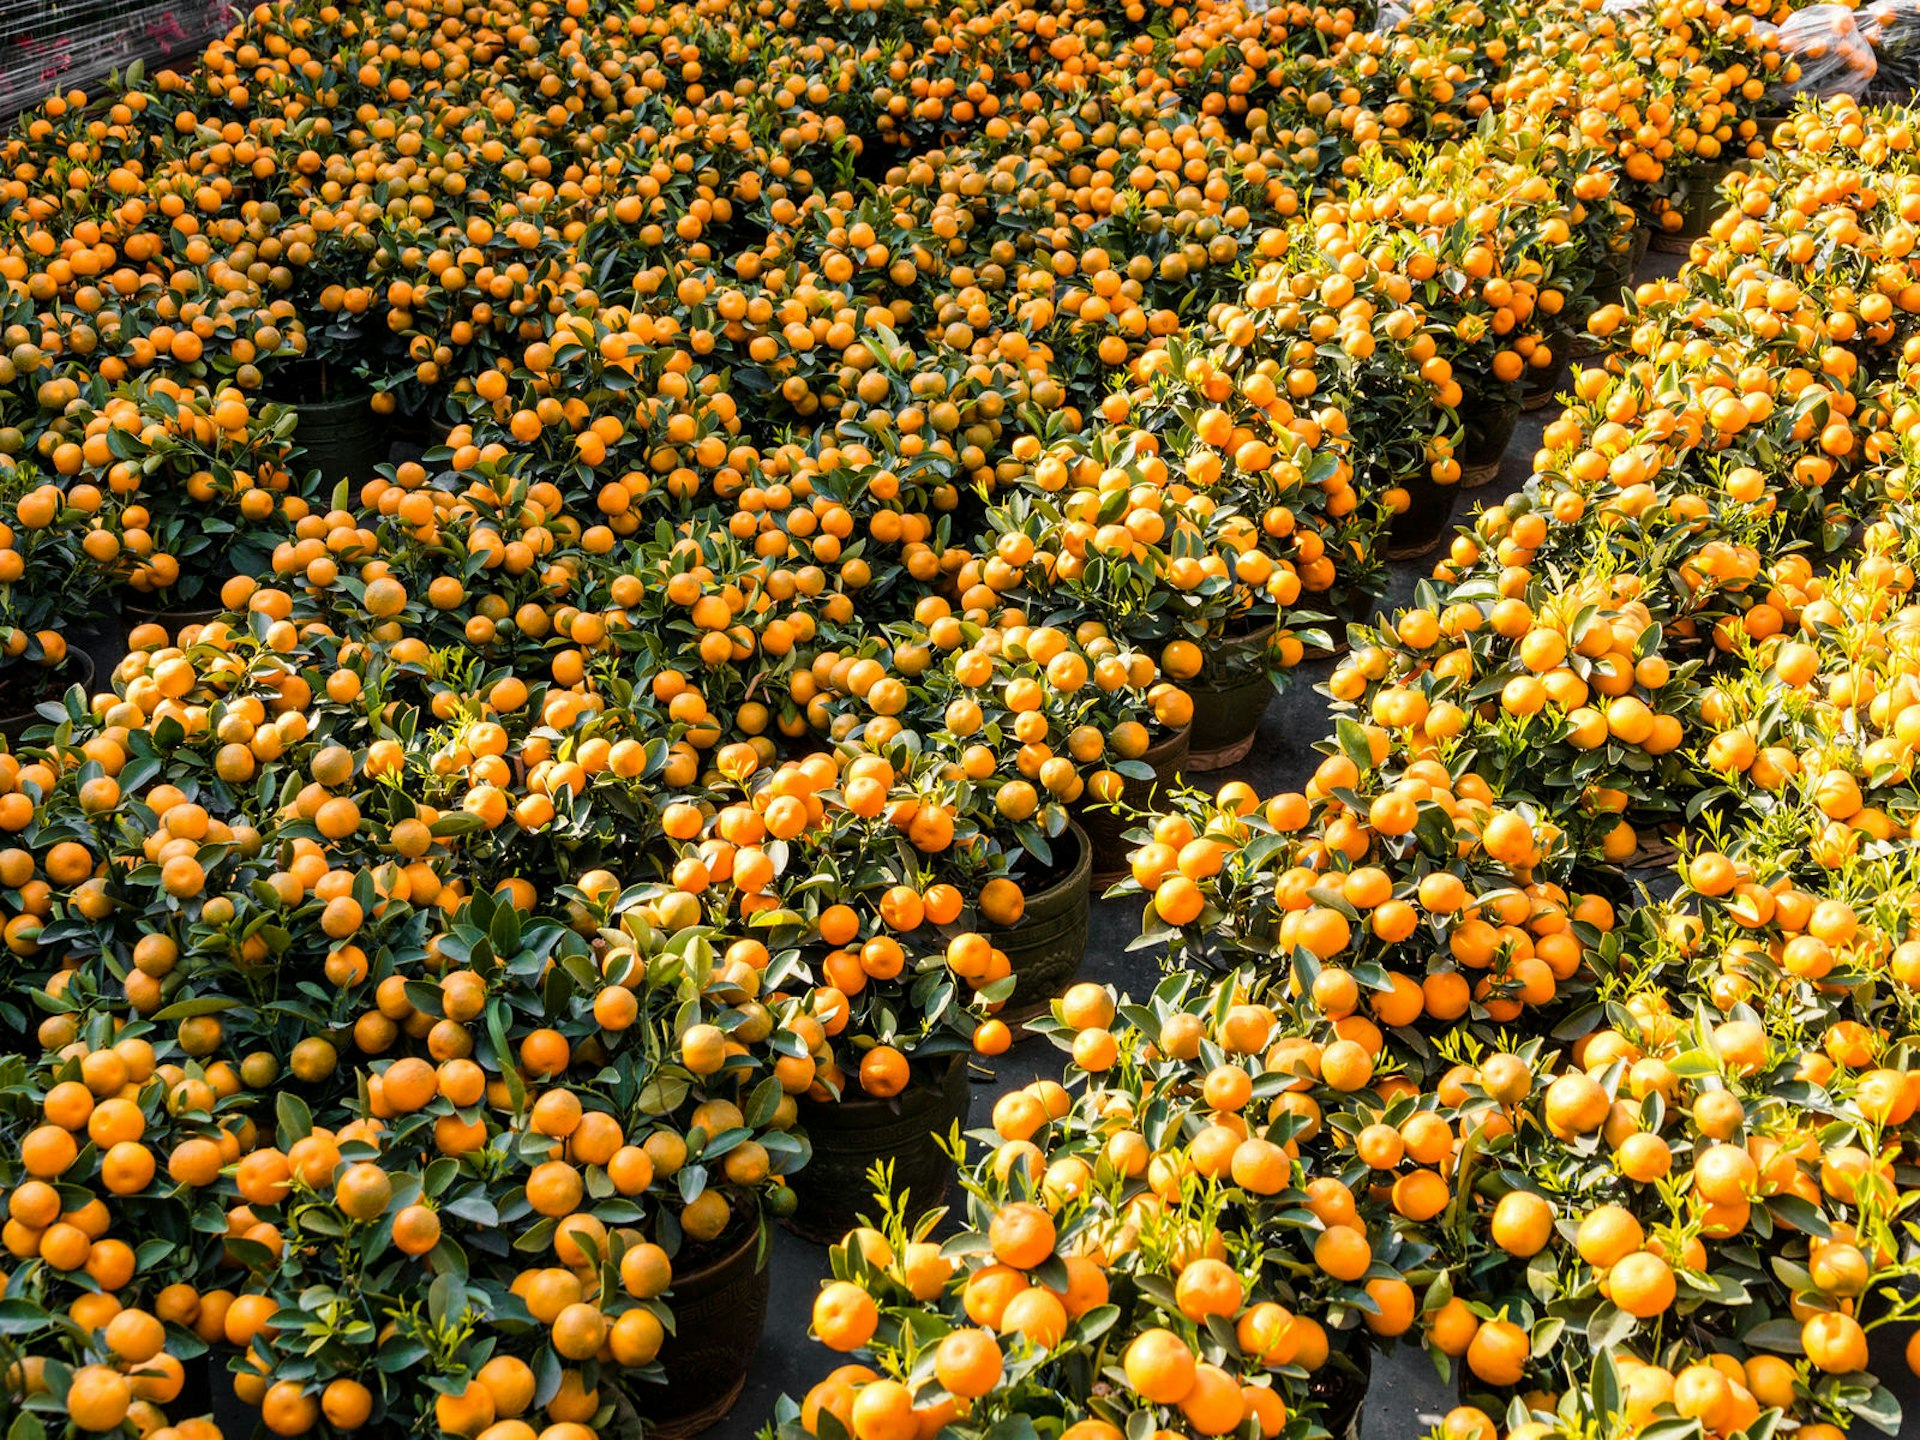 Rows of blooming tangerine trees with ripe orange tangerines covering them © H-AB / Shutterstock